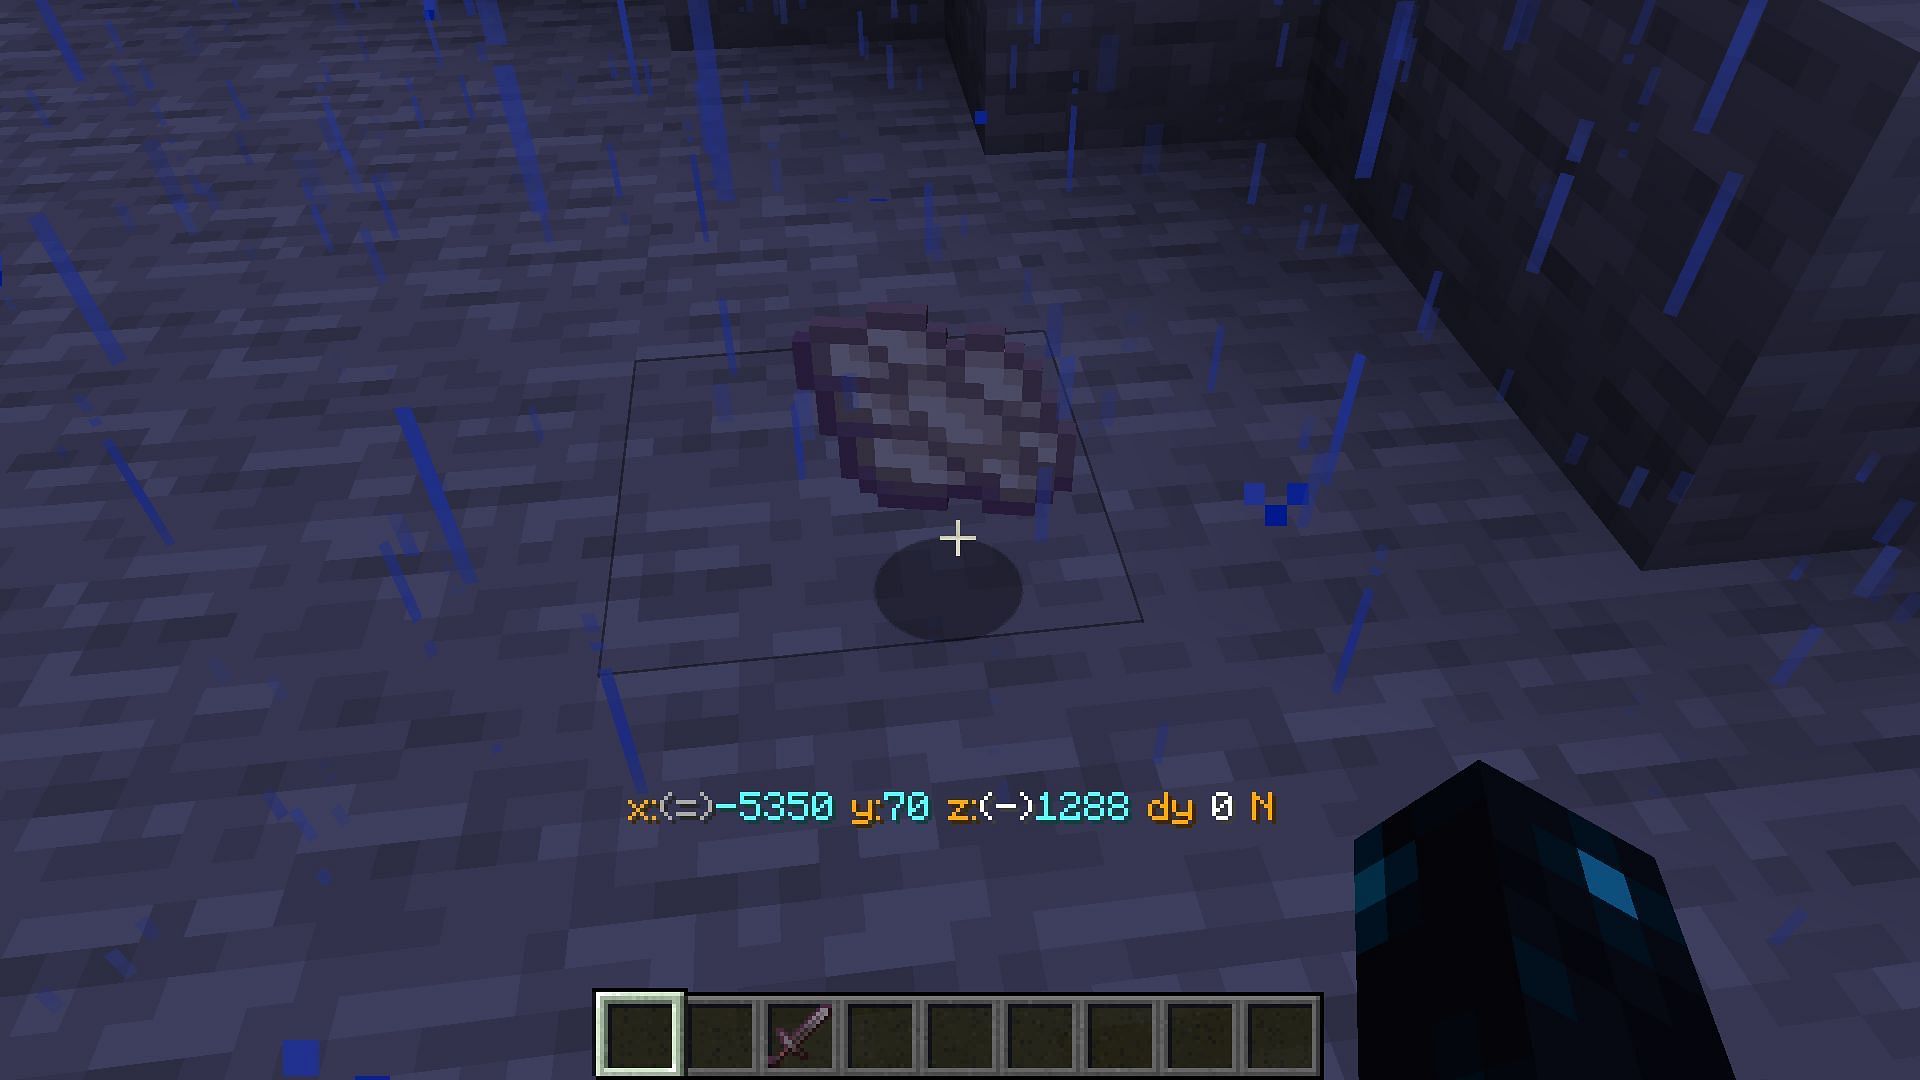 Cats have a 70% chance of giving players a gift after they wake in Minecraft (Image via Mojang)